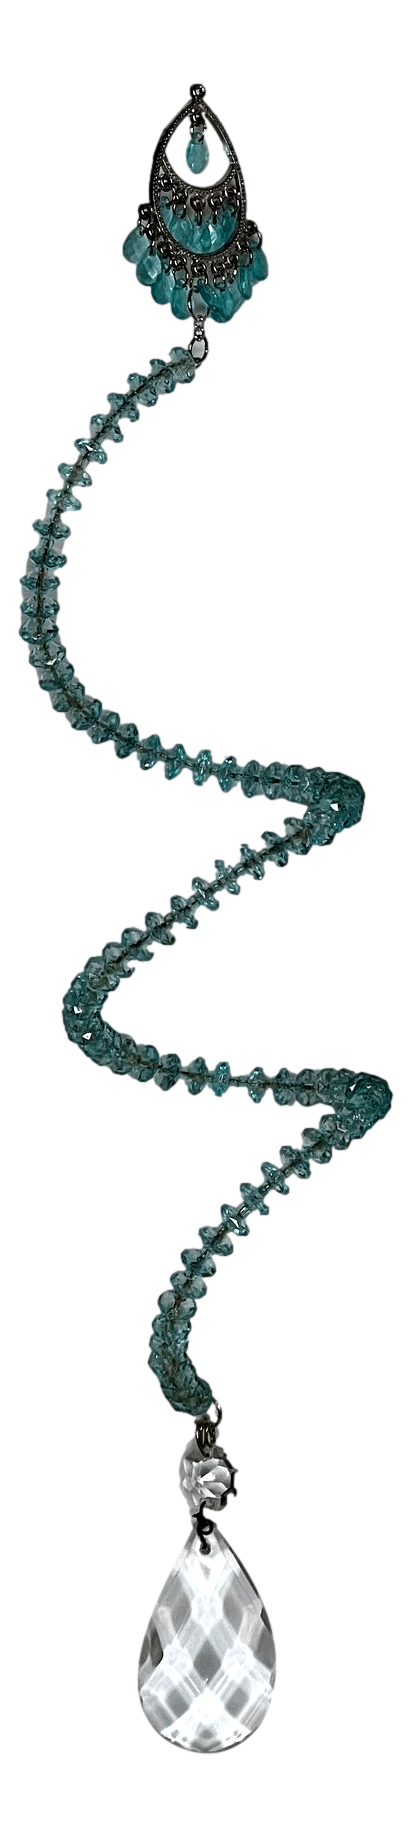 Suncatcher 3 Spiral Design Turquoise Colored Beads Jeweled Parts L: 25 Inches Handcrafted By El Paso Artist Nancy - Ysleta Mission Gift Shop- VOTED El Paso's Best Gift Shop